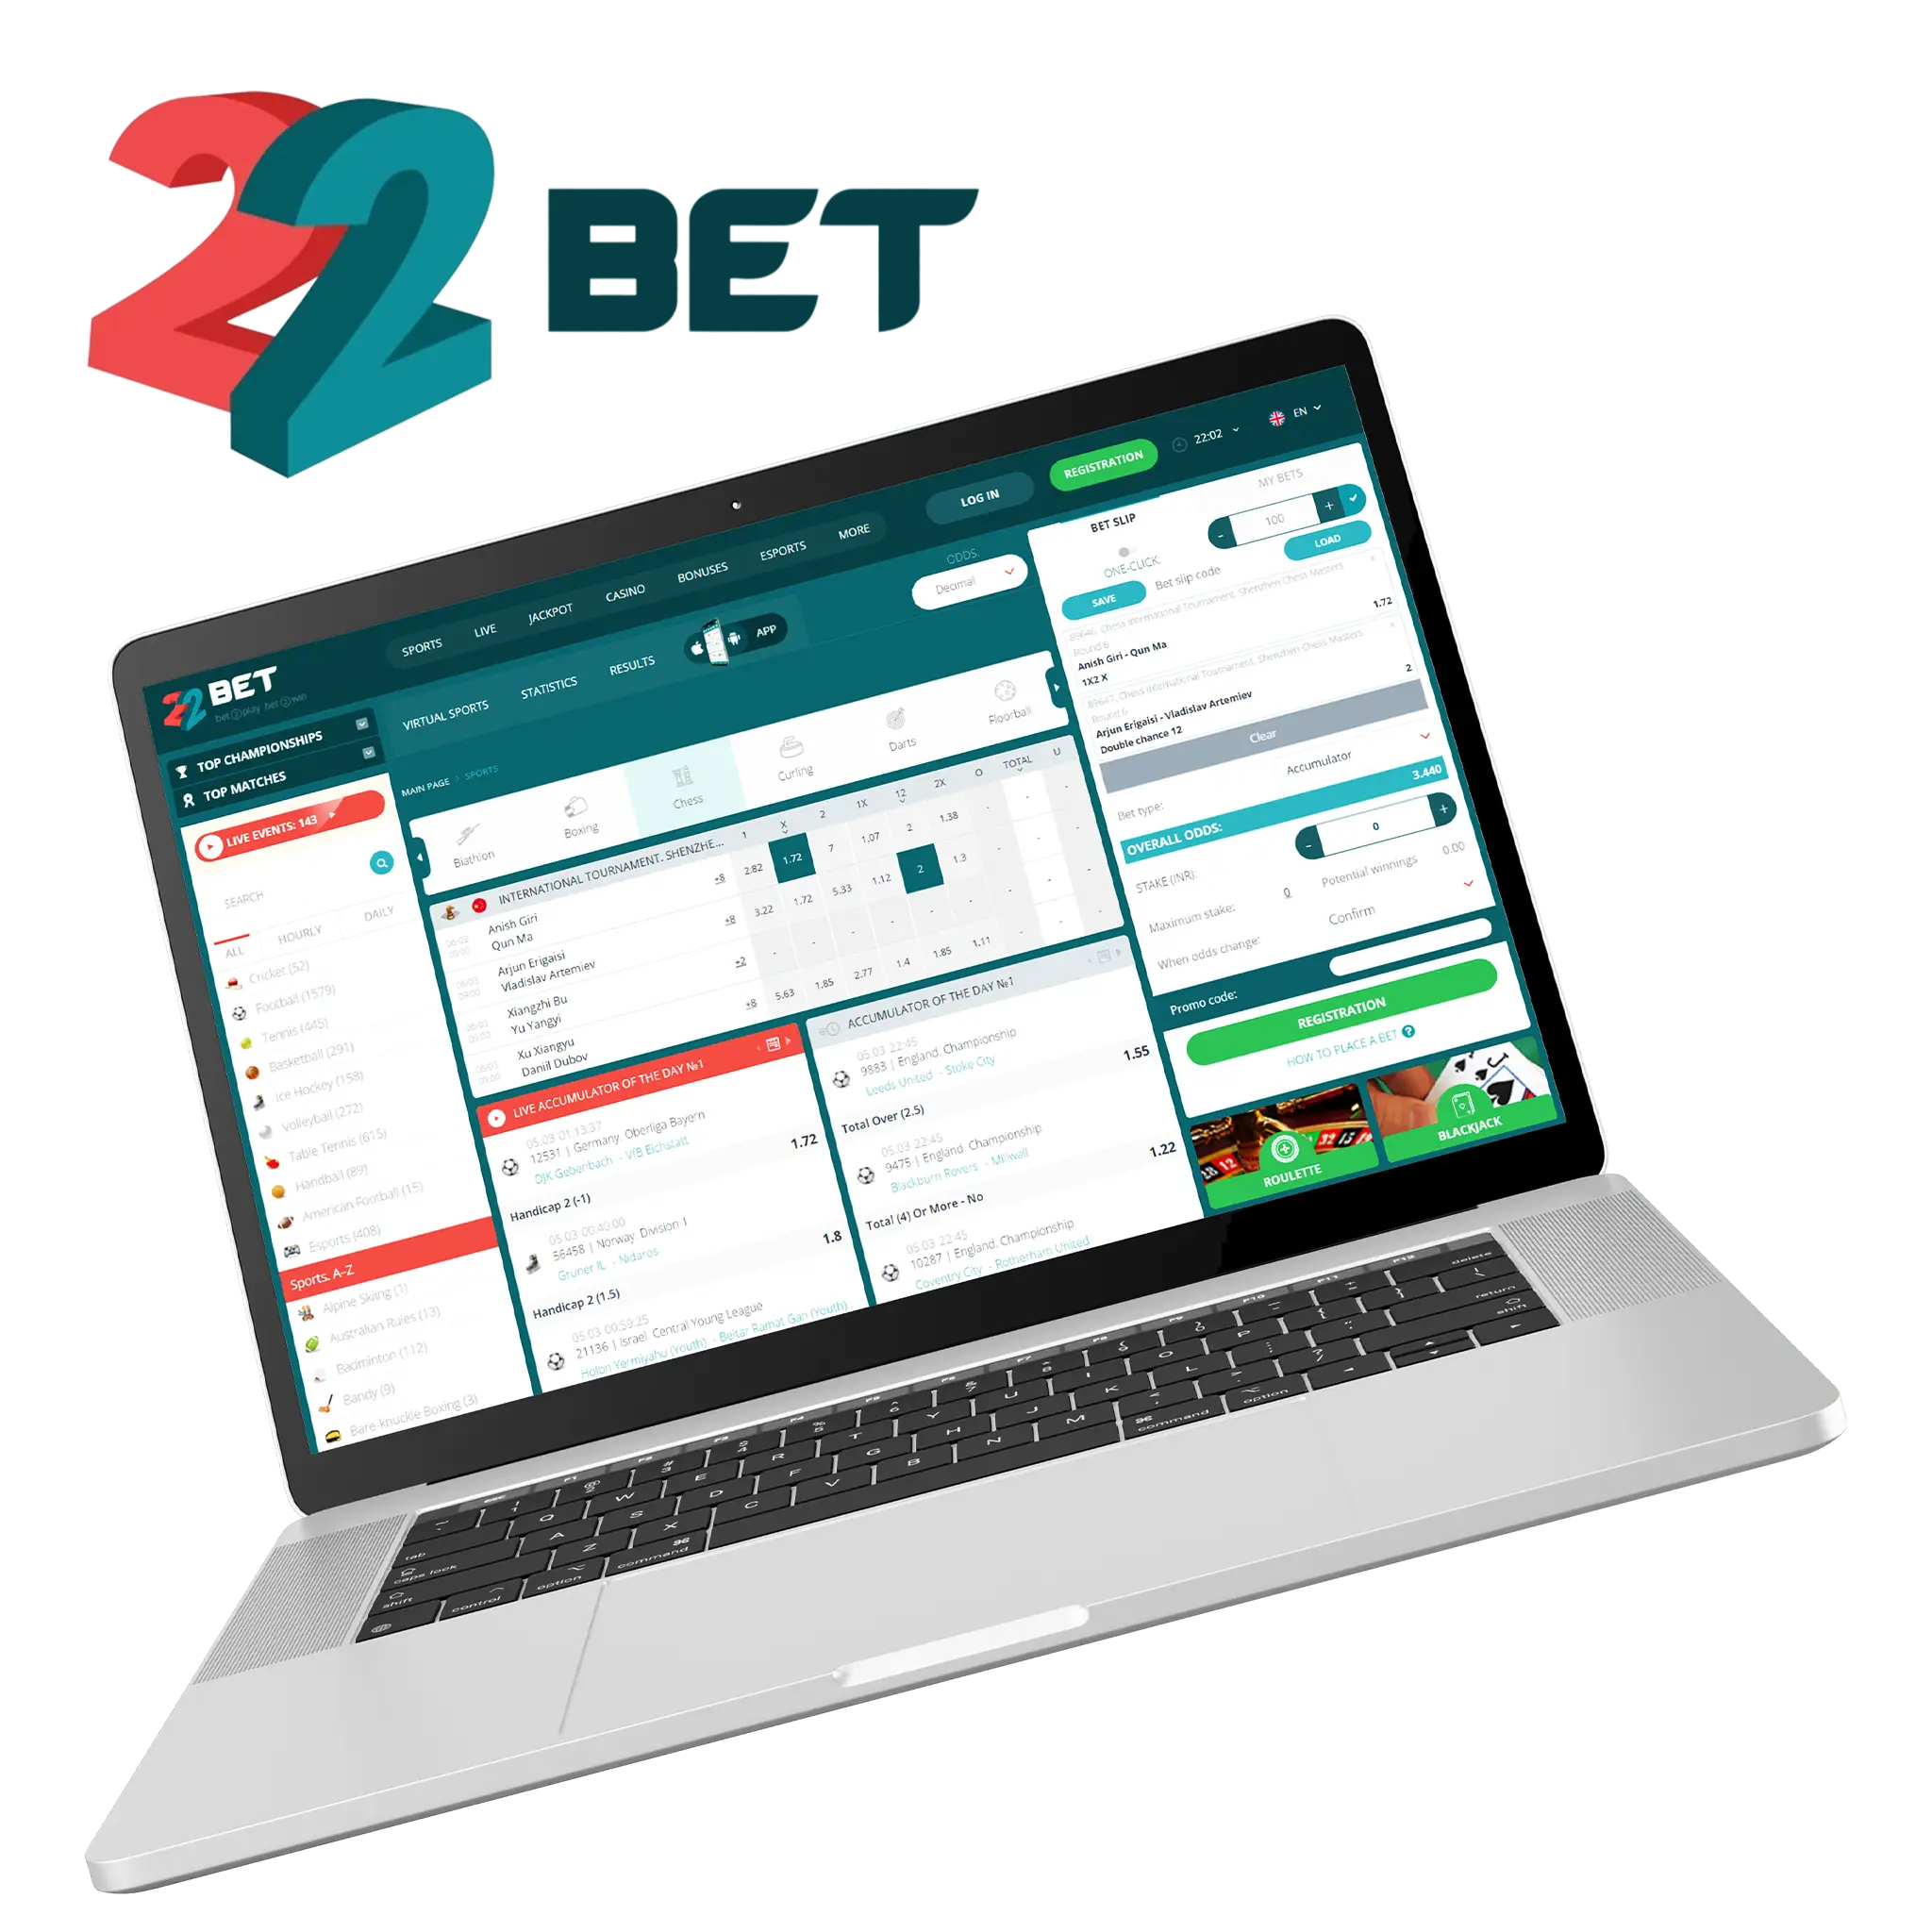 22bet is a fully licensed and legal for online chess betting in India.